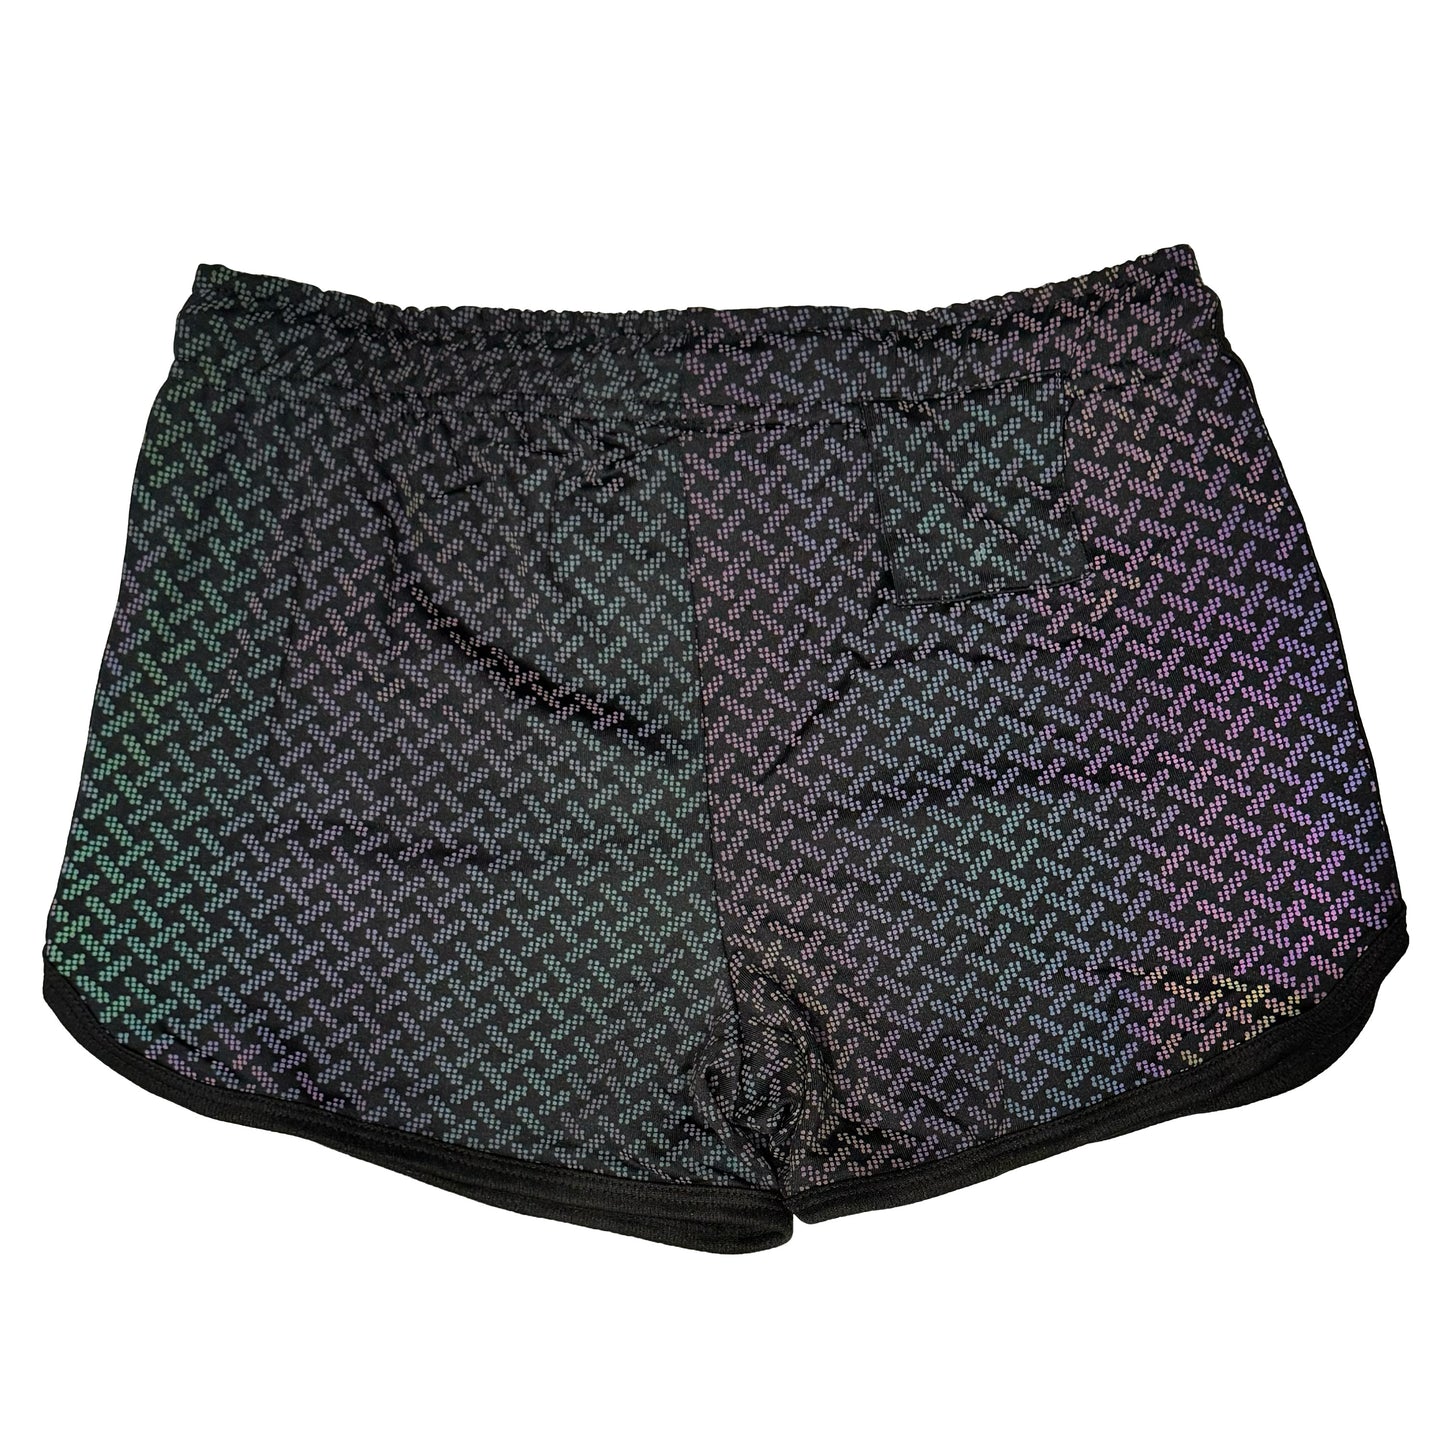 The "VPL" Party Shorts - Flash Reflective Weave